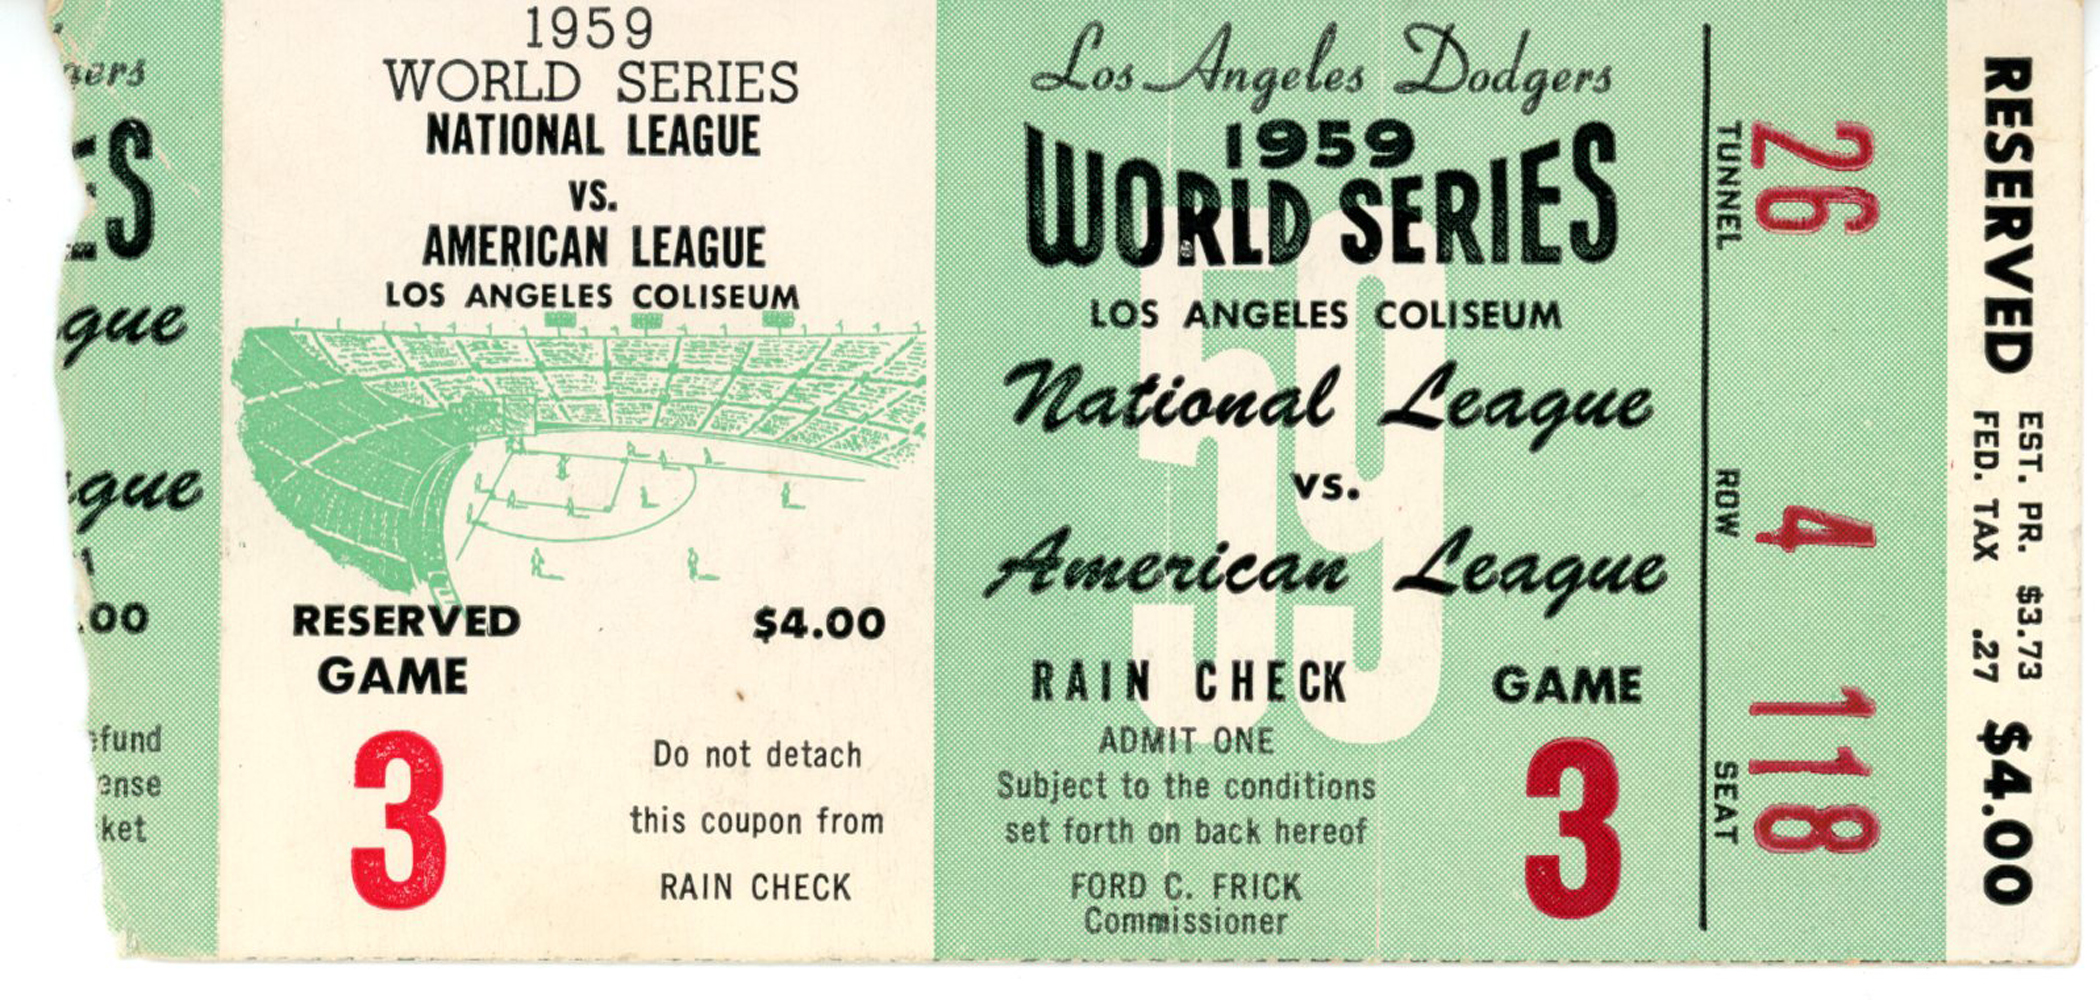 1959 World Series Game 3 Ticket Stub Los Angeles Dodgers vs White Sox